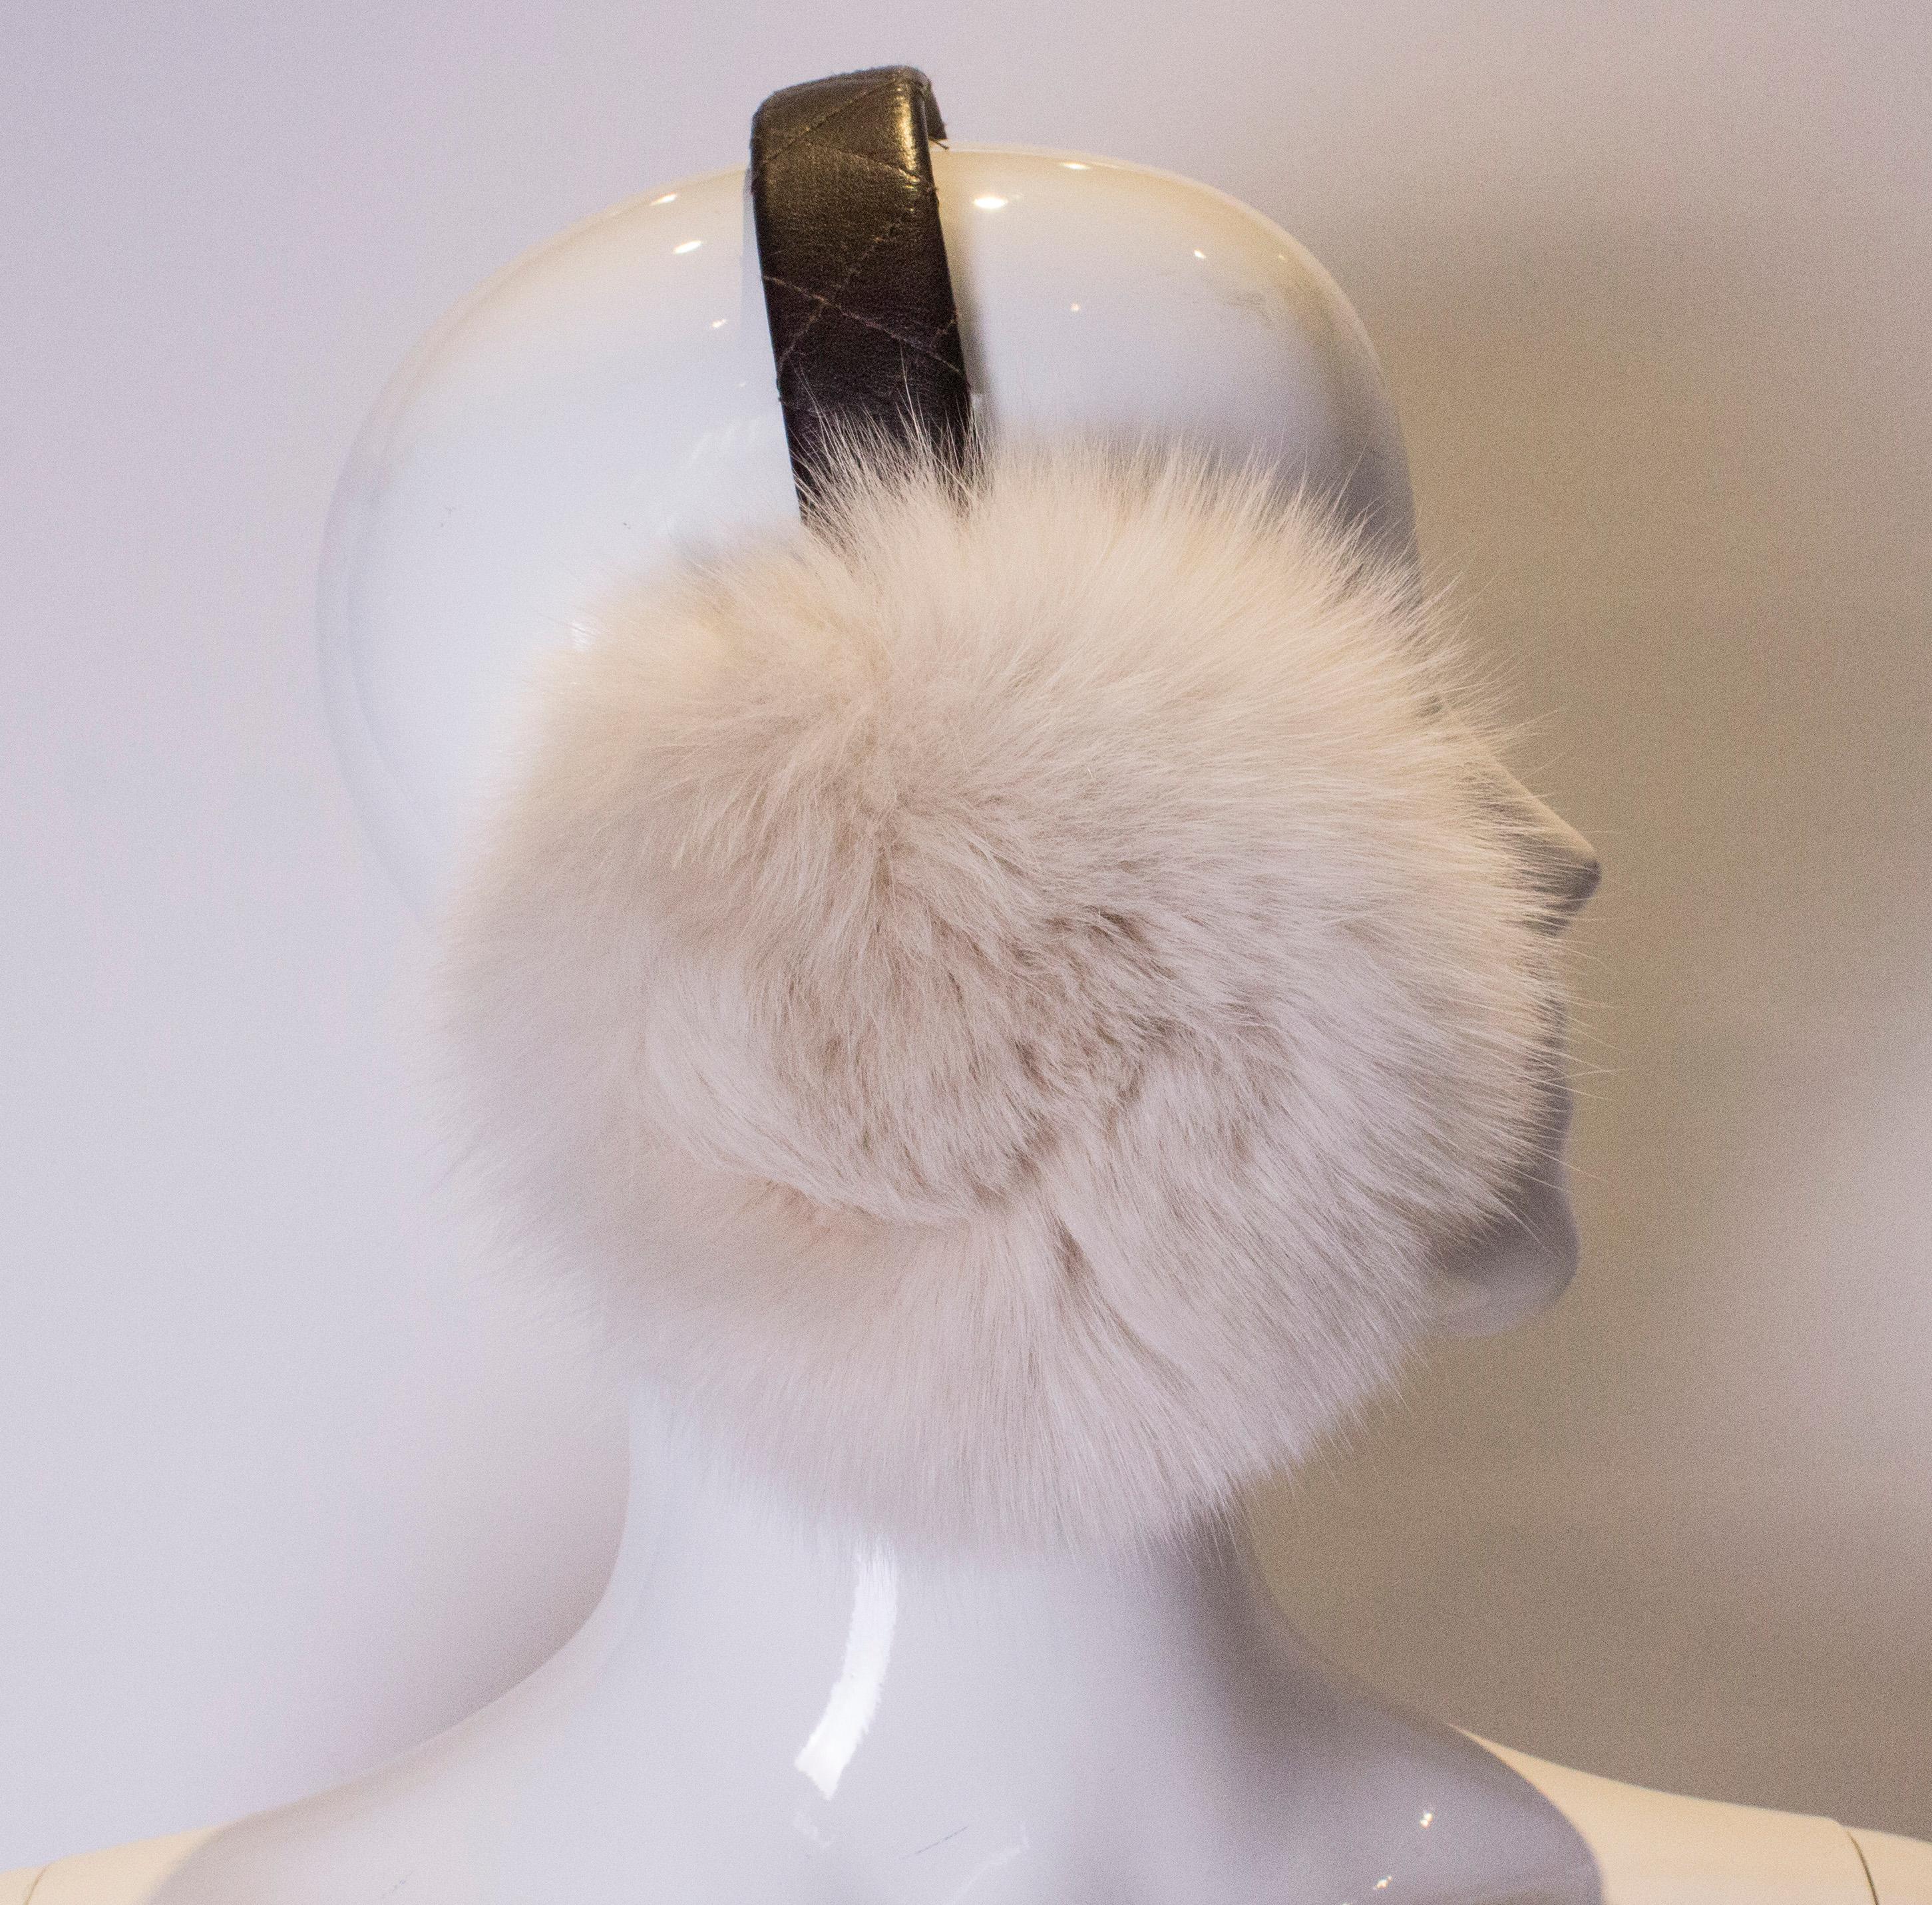 Fun, practical and never been used, these fox fur ear muffs are great for the winter weather.
They are white with a smart, brown leather connecting band.